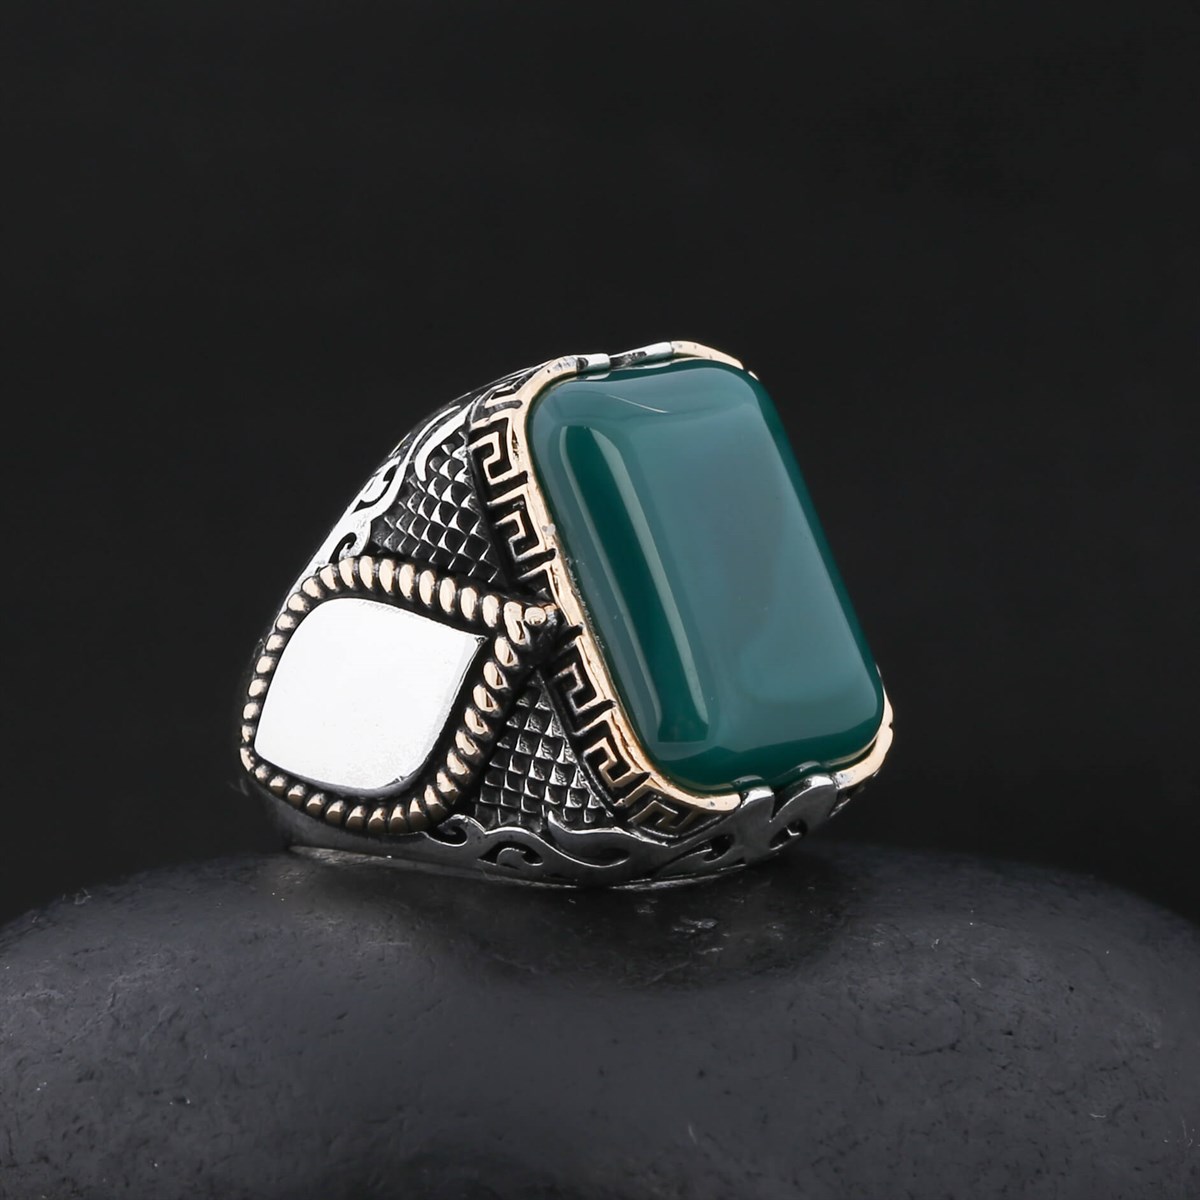 Green Agate Stone Side Patterned Sterling Silver Men's Ring